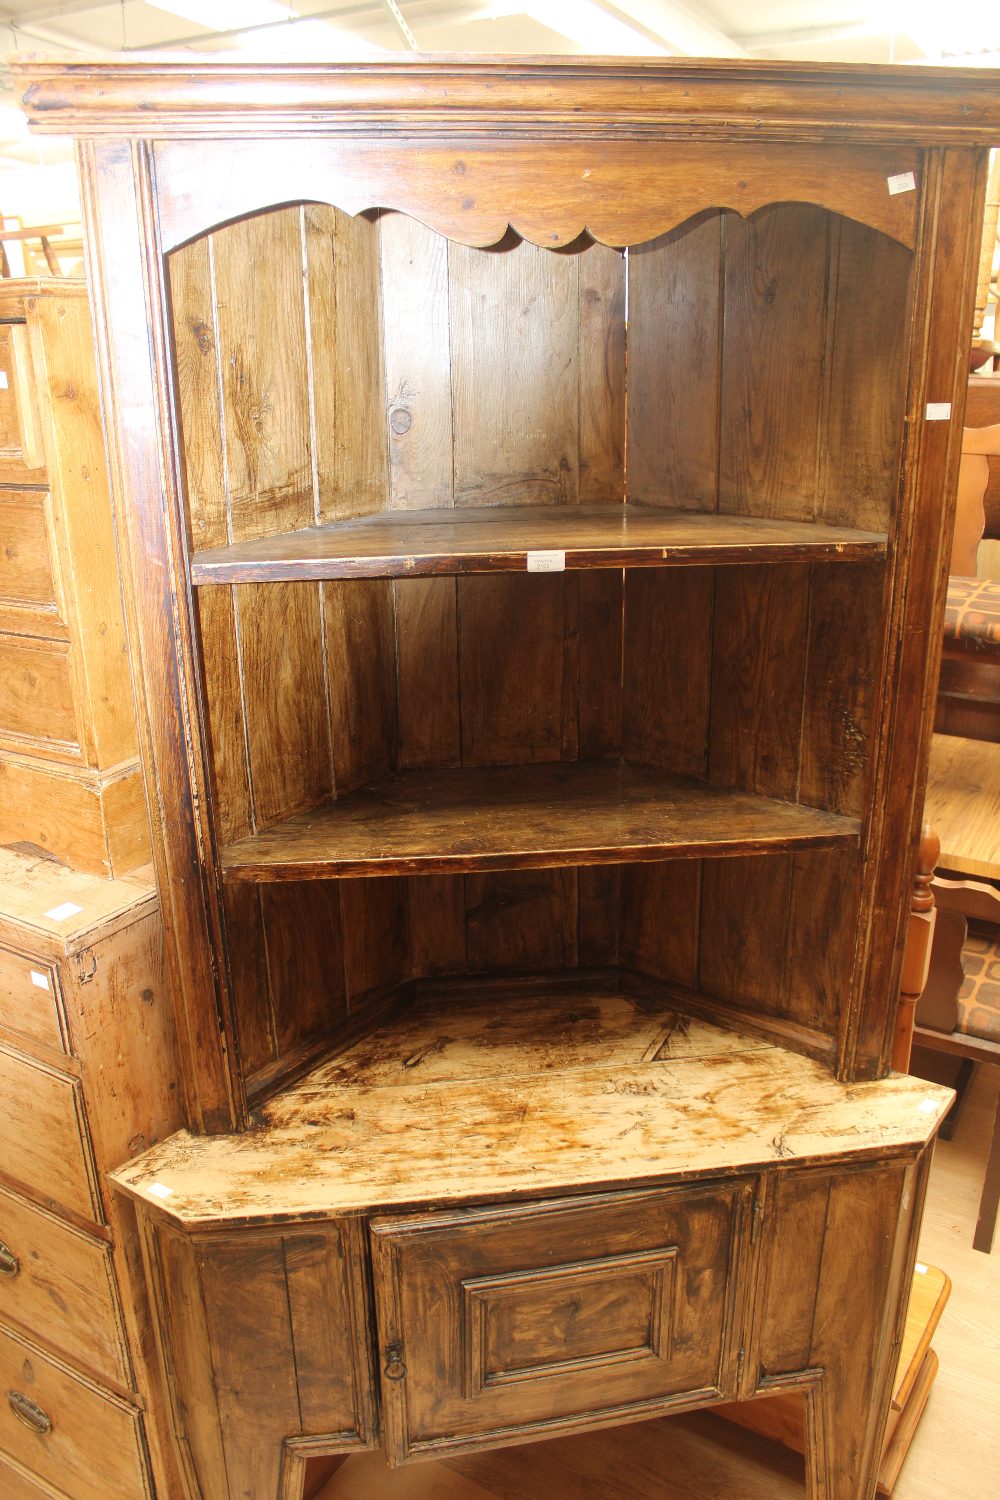 An early 20th century wood grained corner unit